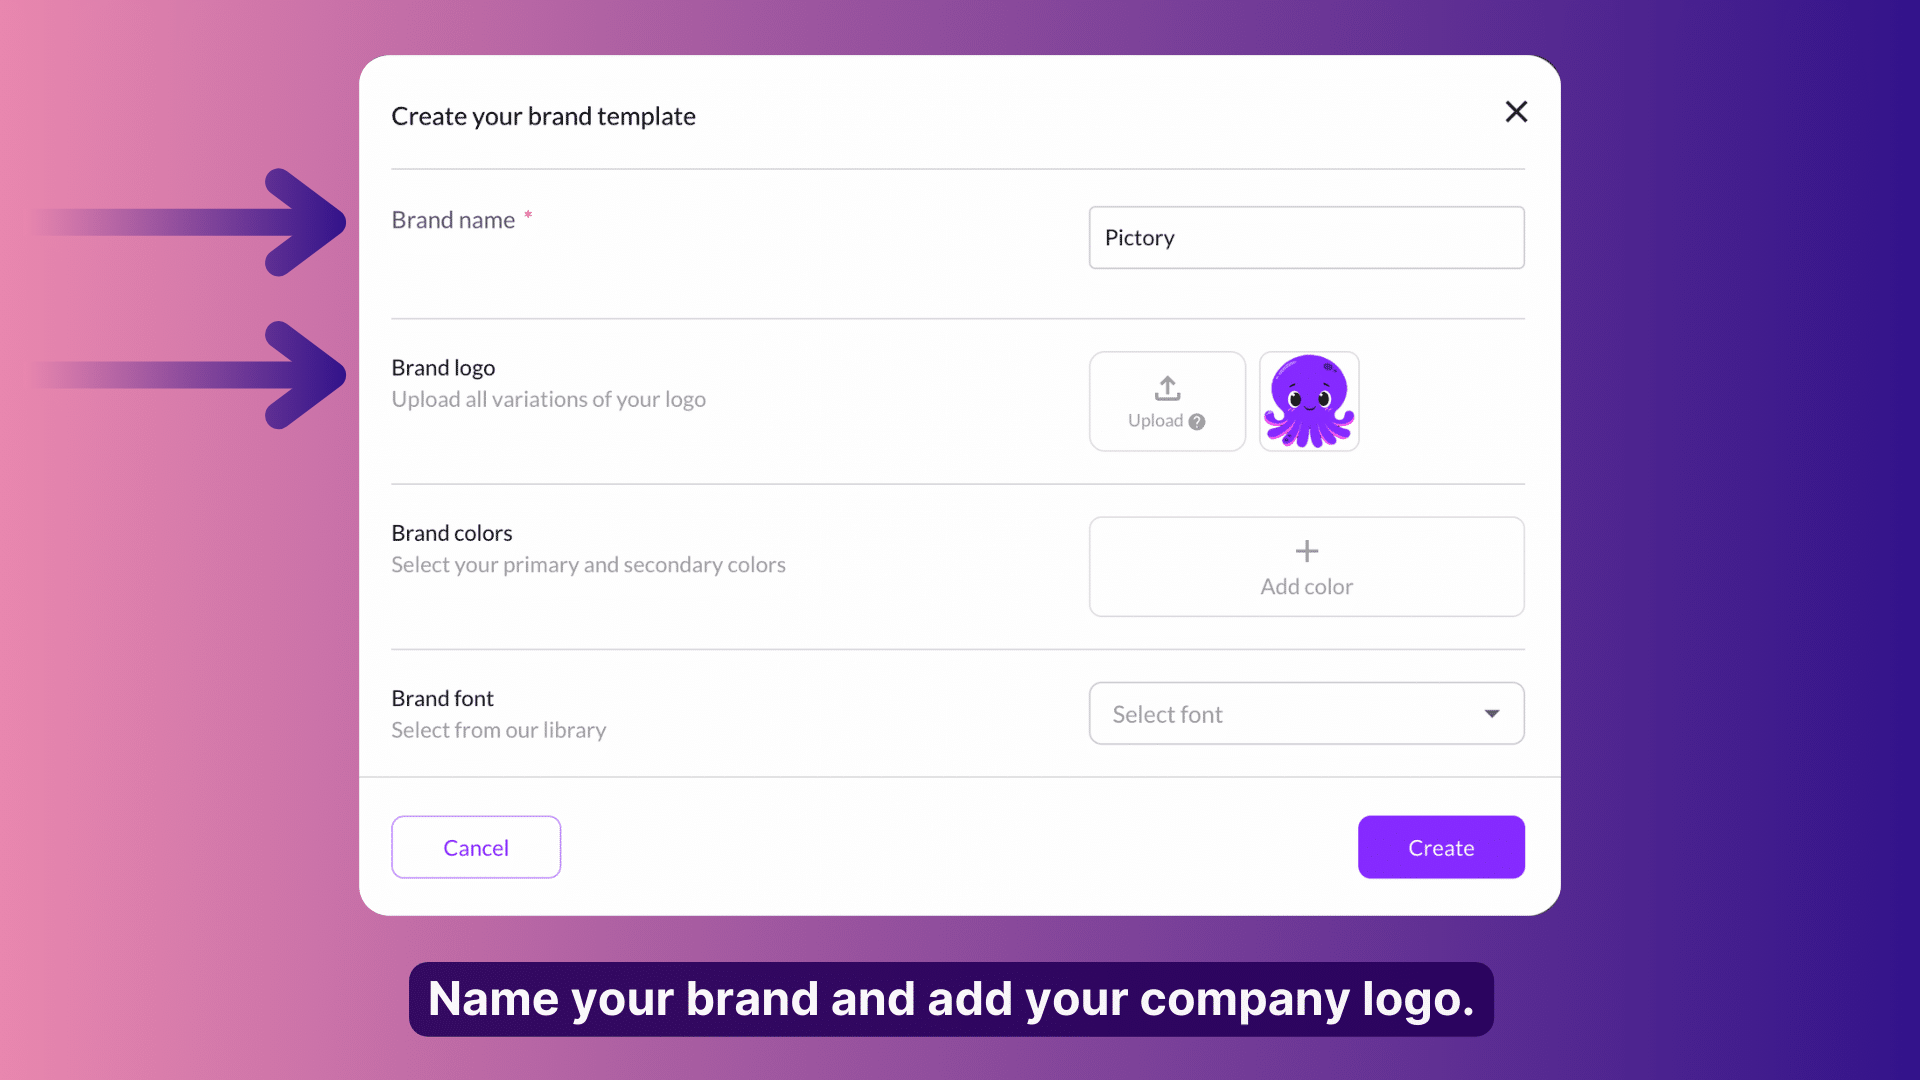 Name your brand and upload any and all variations of your company logo